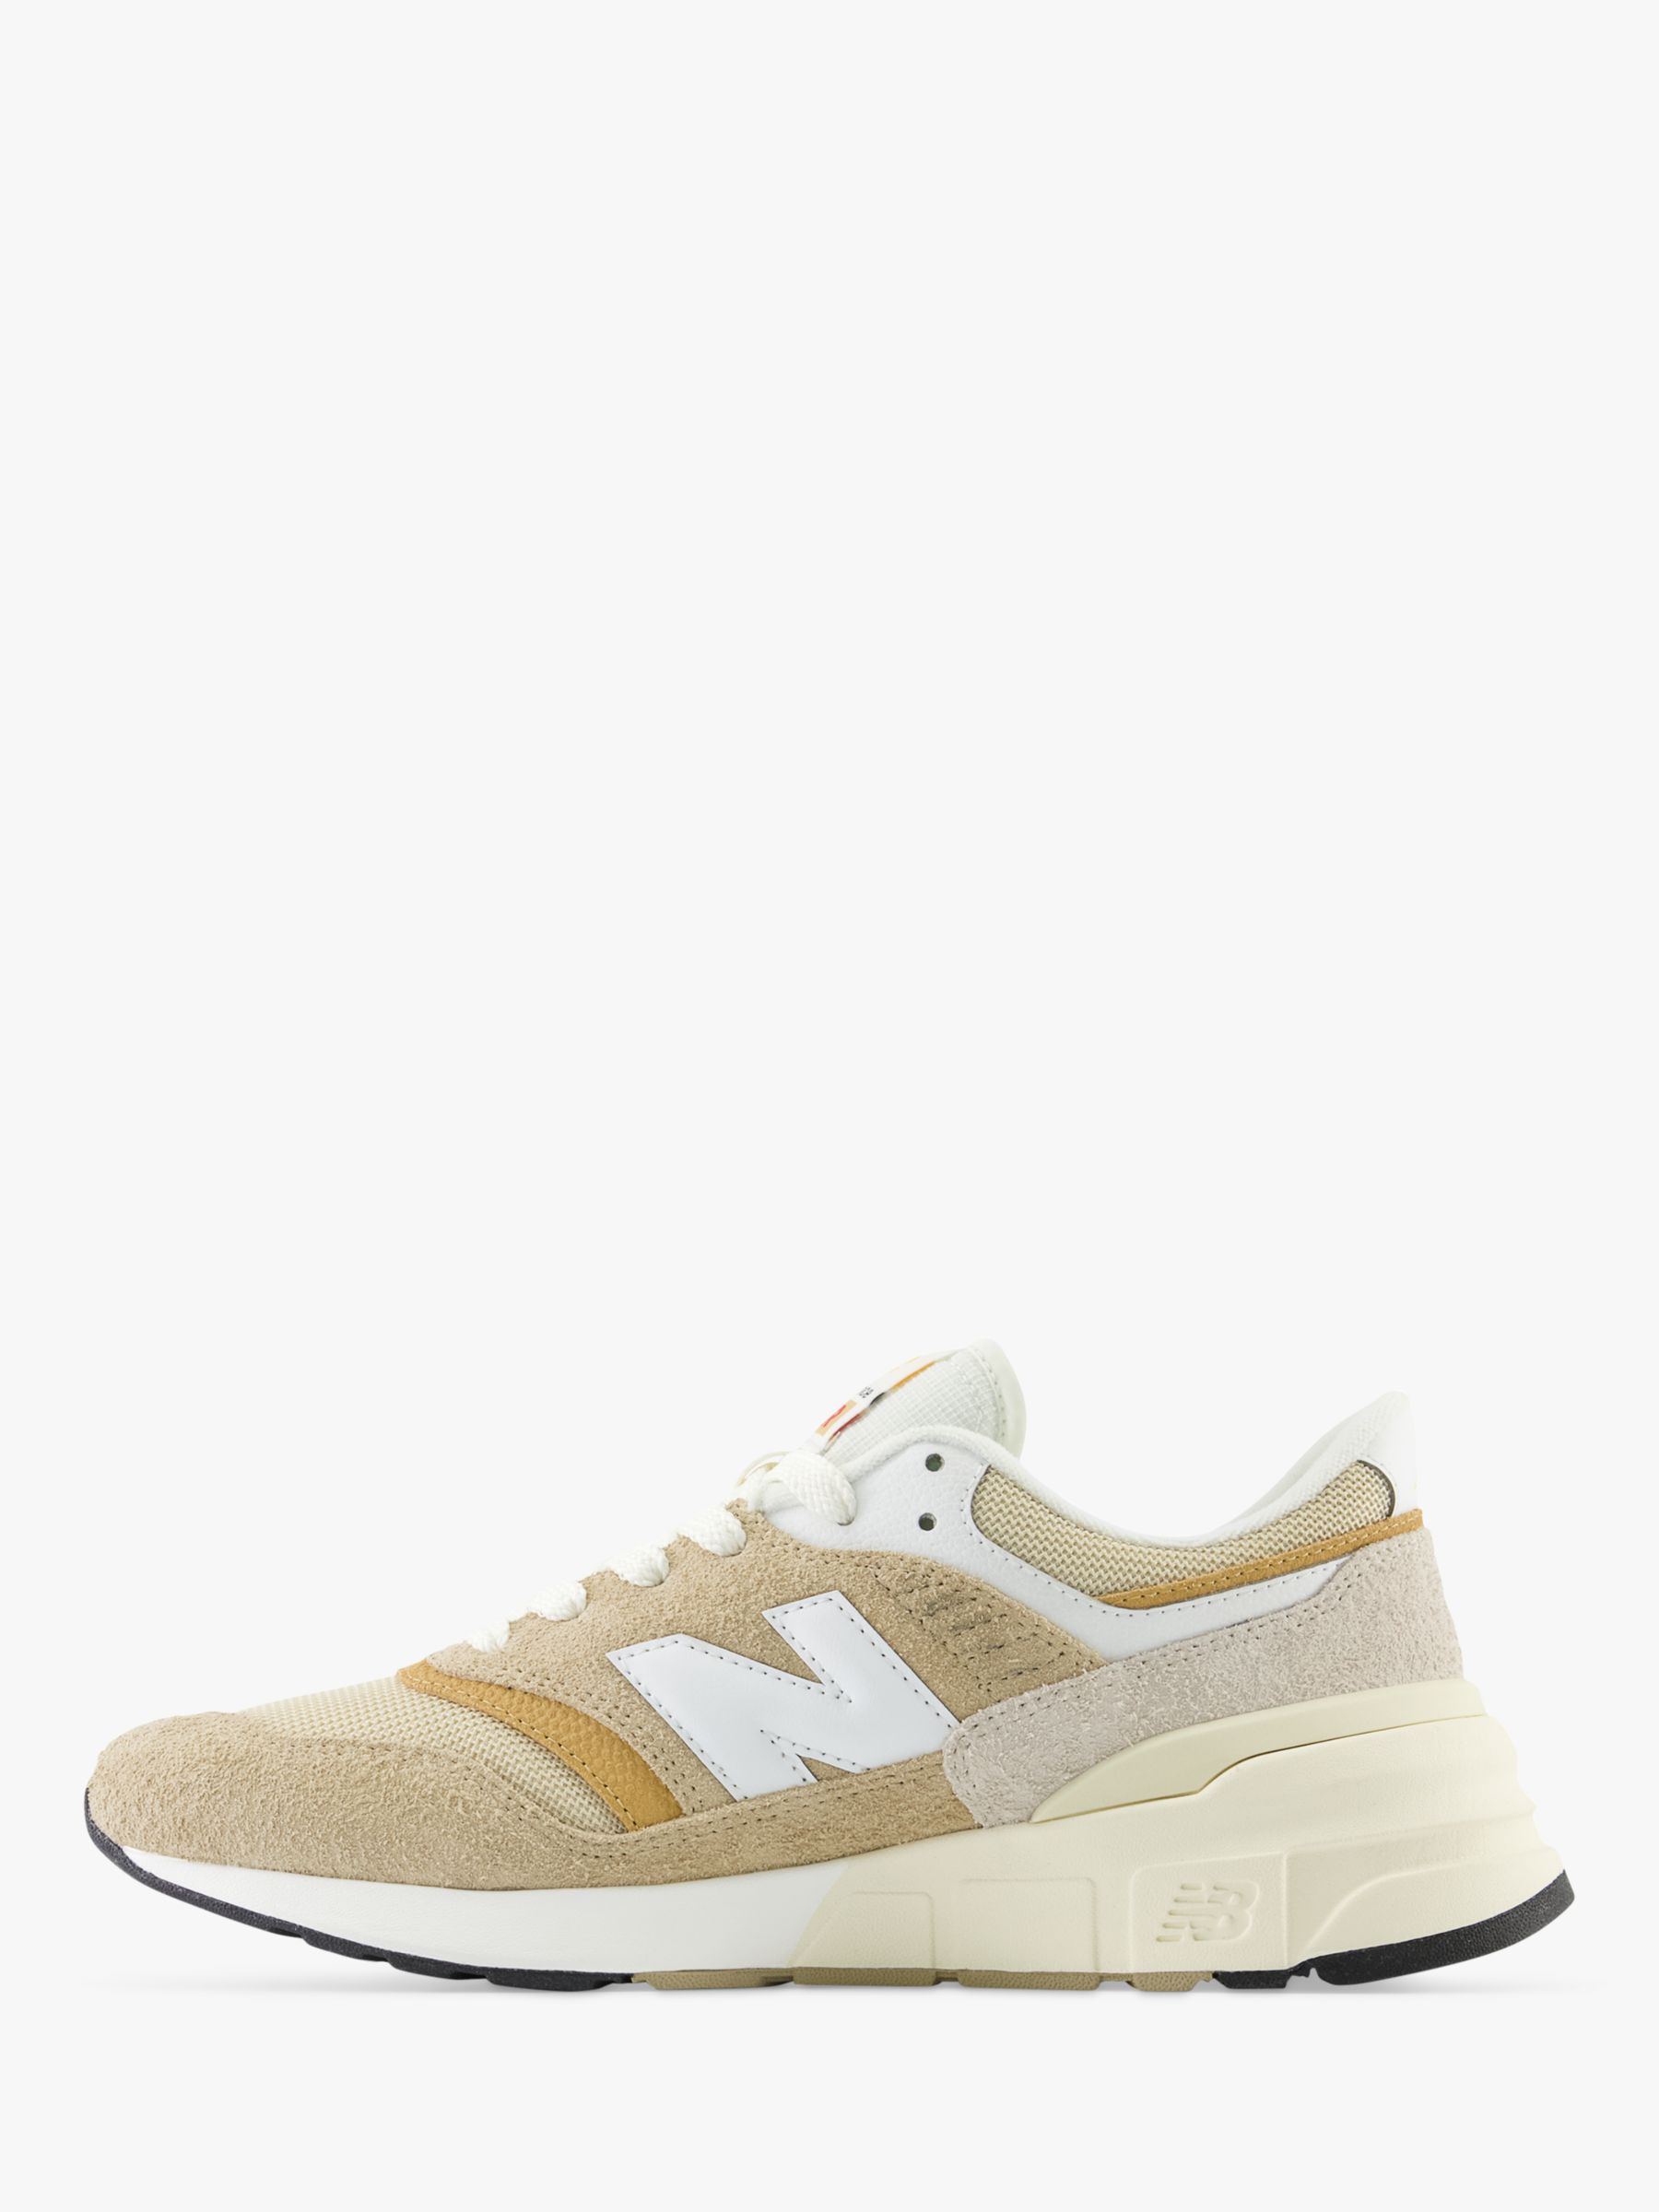 Buy New Balance 997R Men's Suede Trainers Online at johnlewis.com